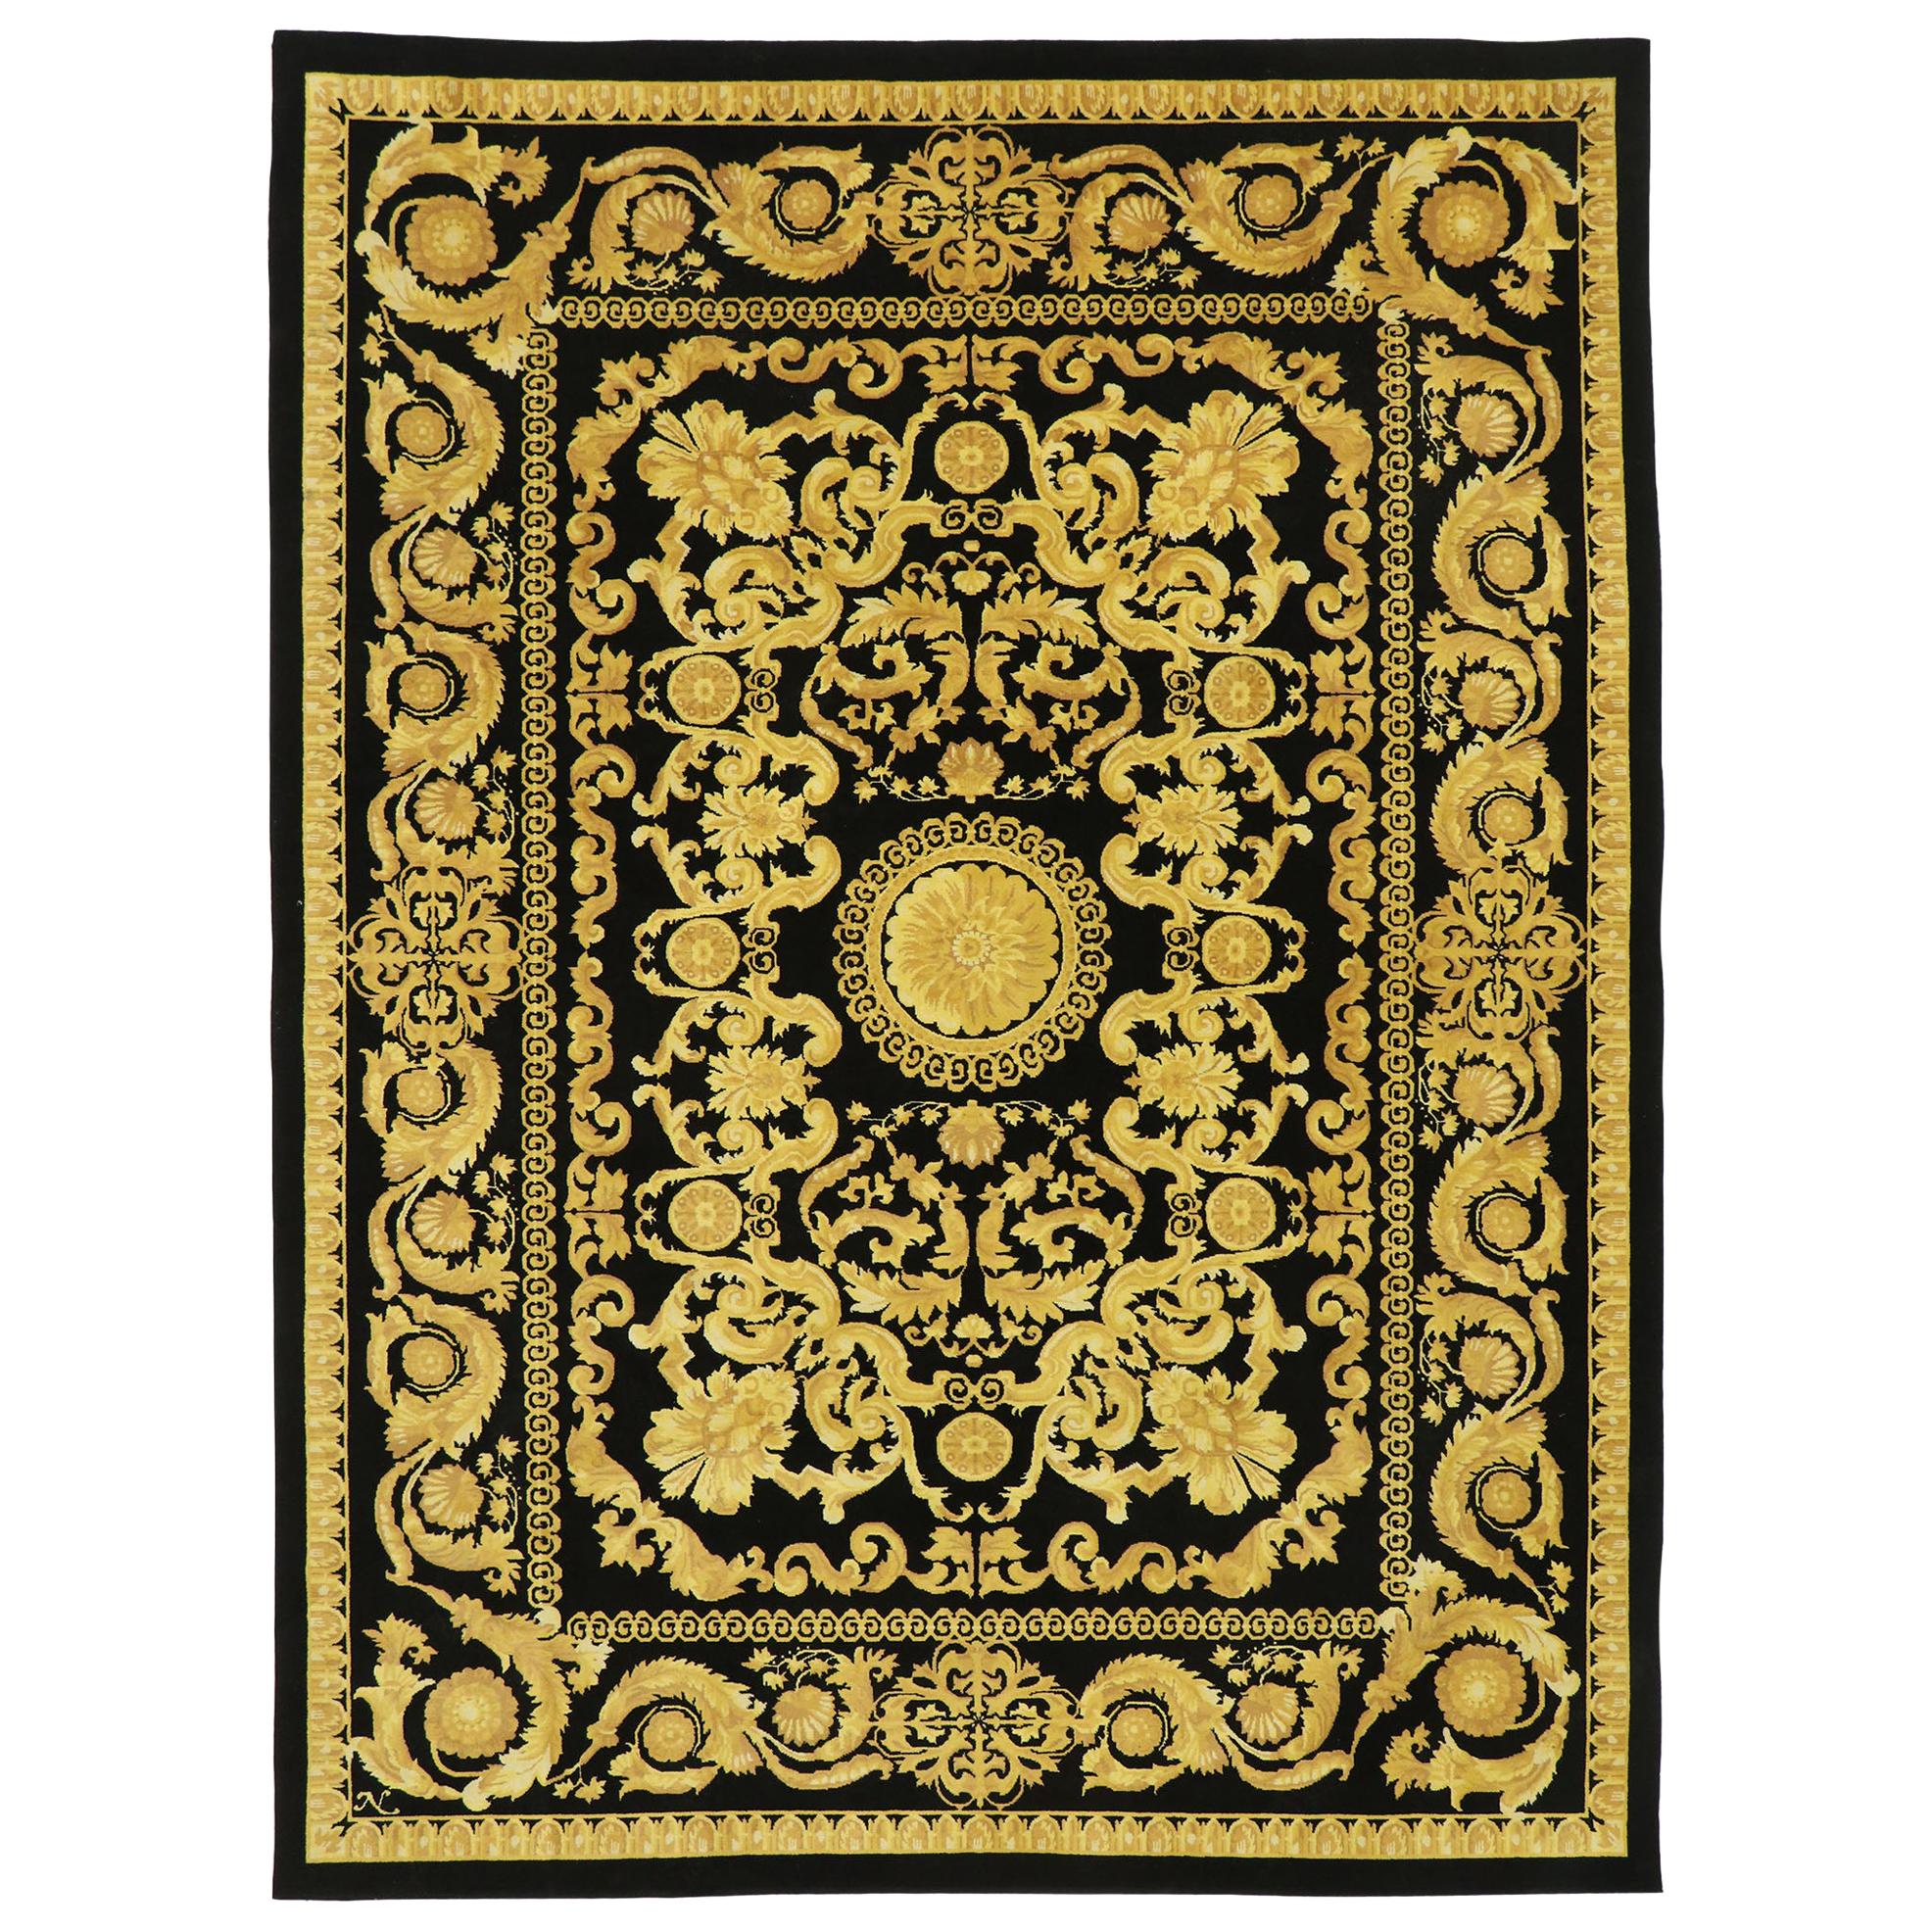 Vintage Indian Rug with Versace Baroque Style